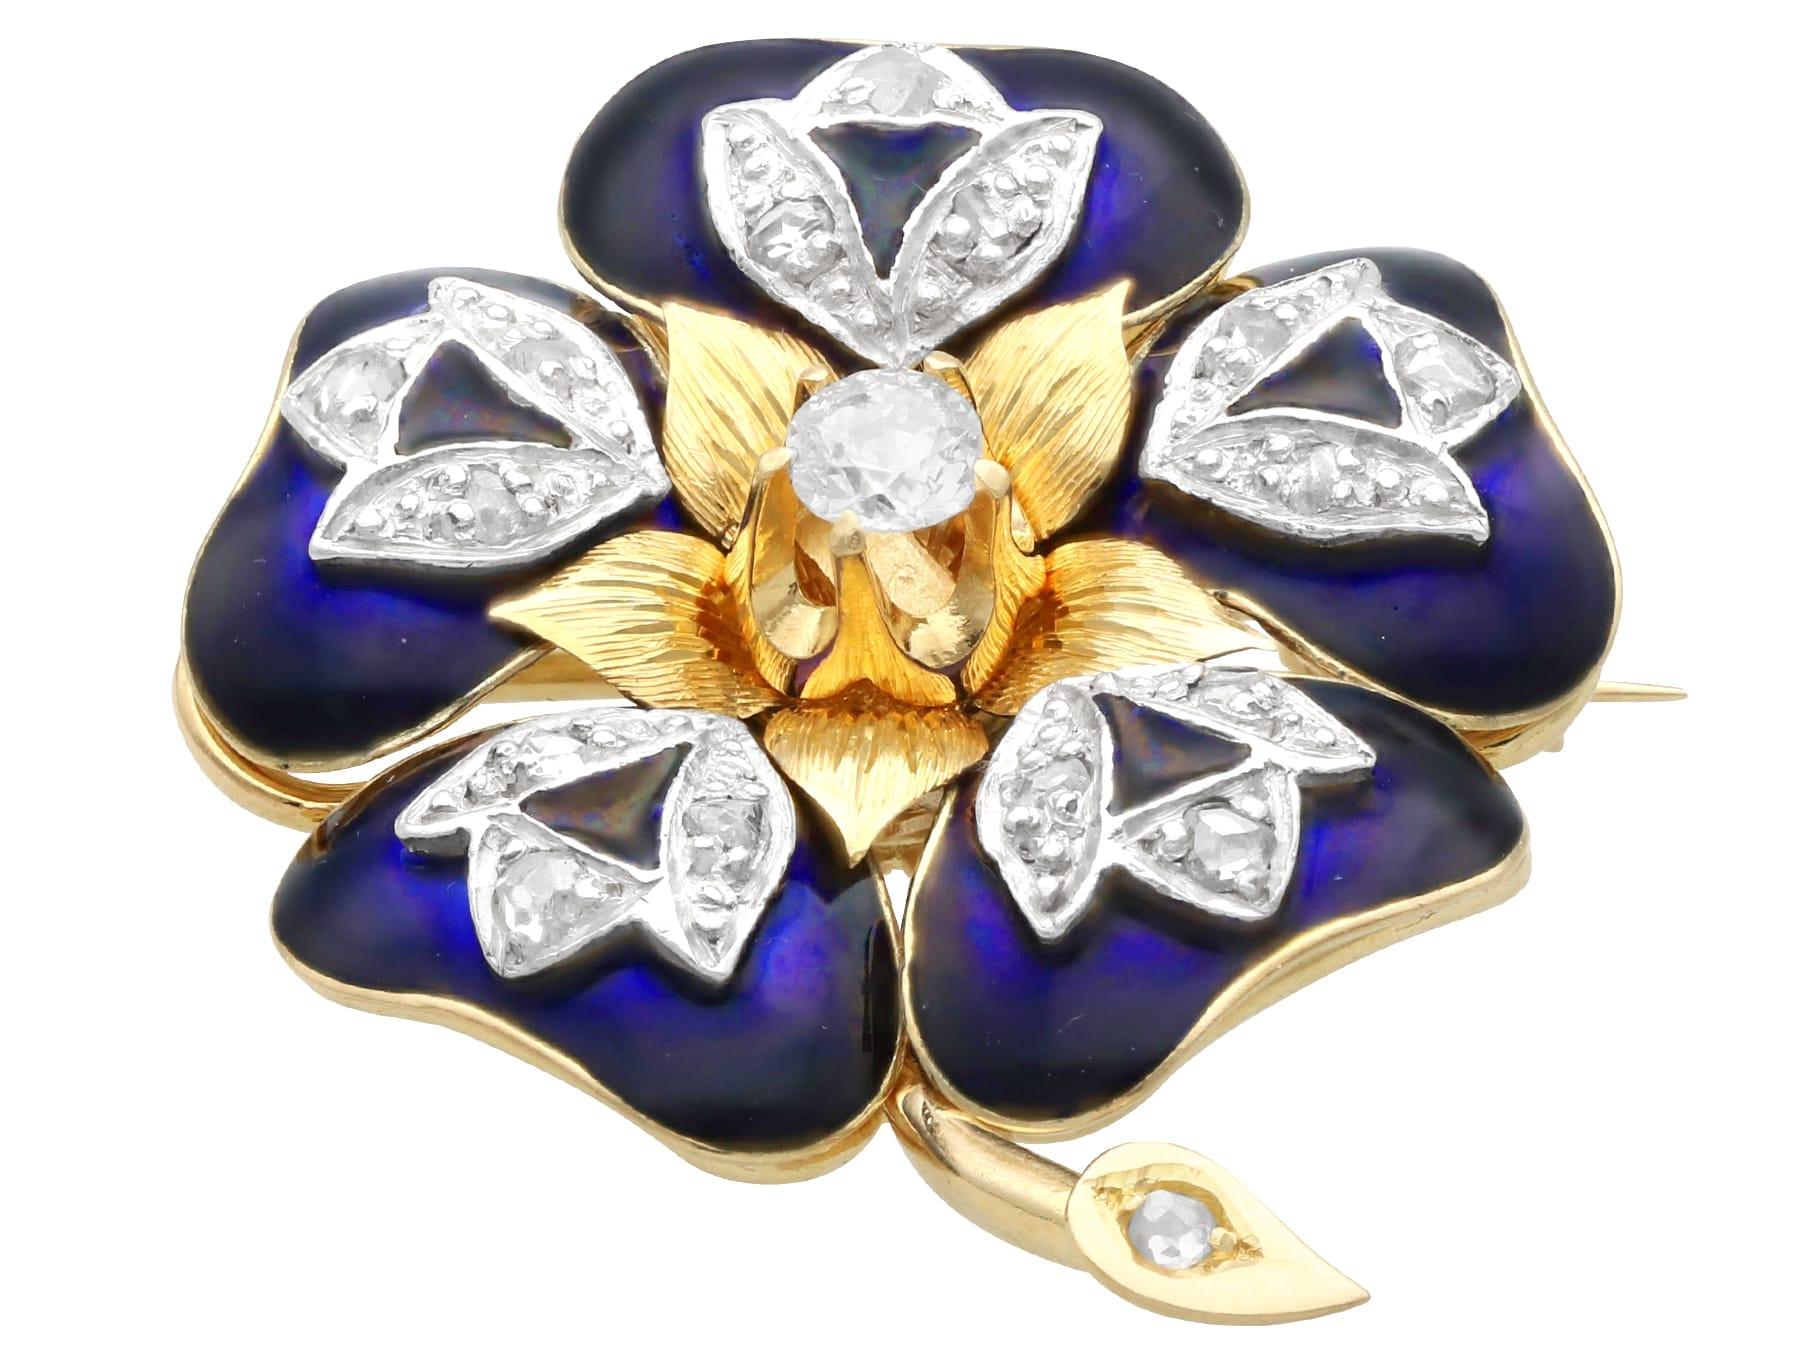 Antique 0.52 Carat Diamond and Enamel 18k Yellow Gold Flower Brooch In Excellent Condition For Sale In Jesmond, Newcastle Upon Tyne